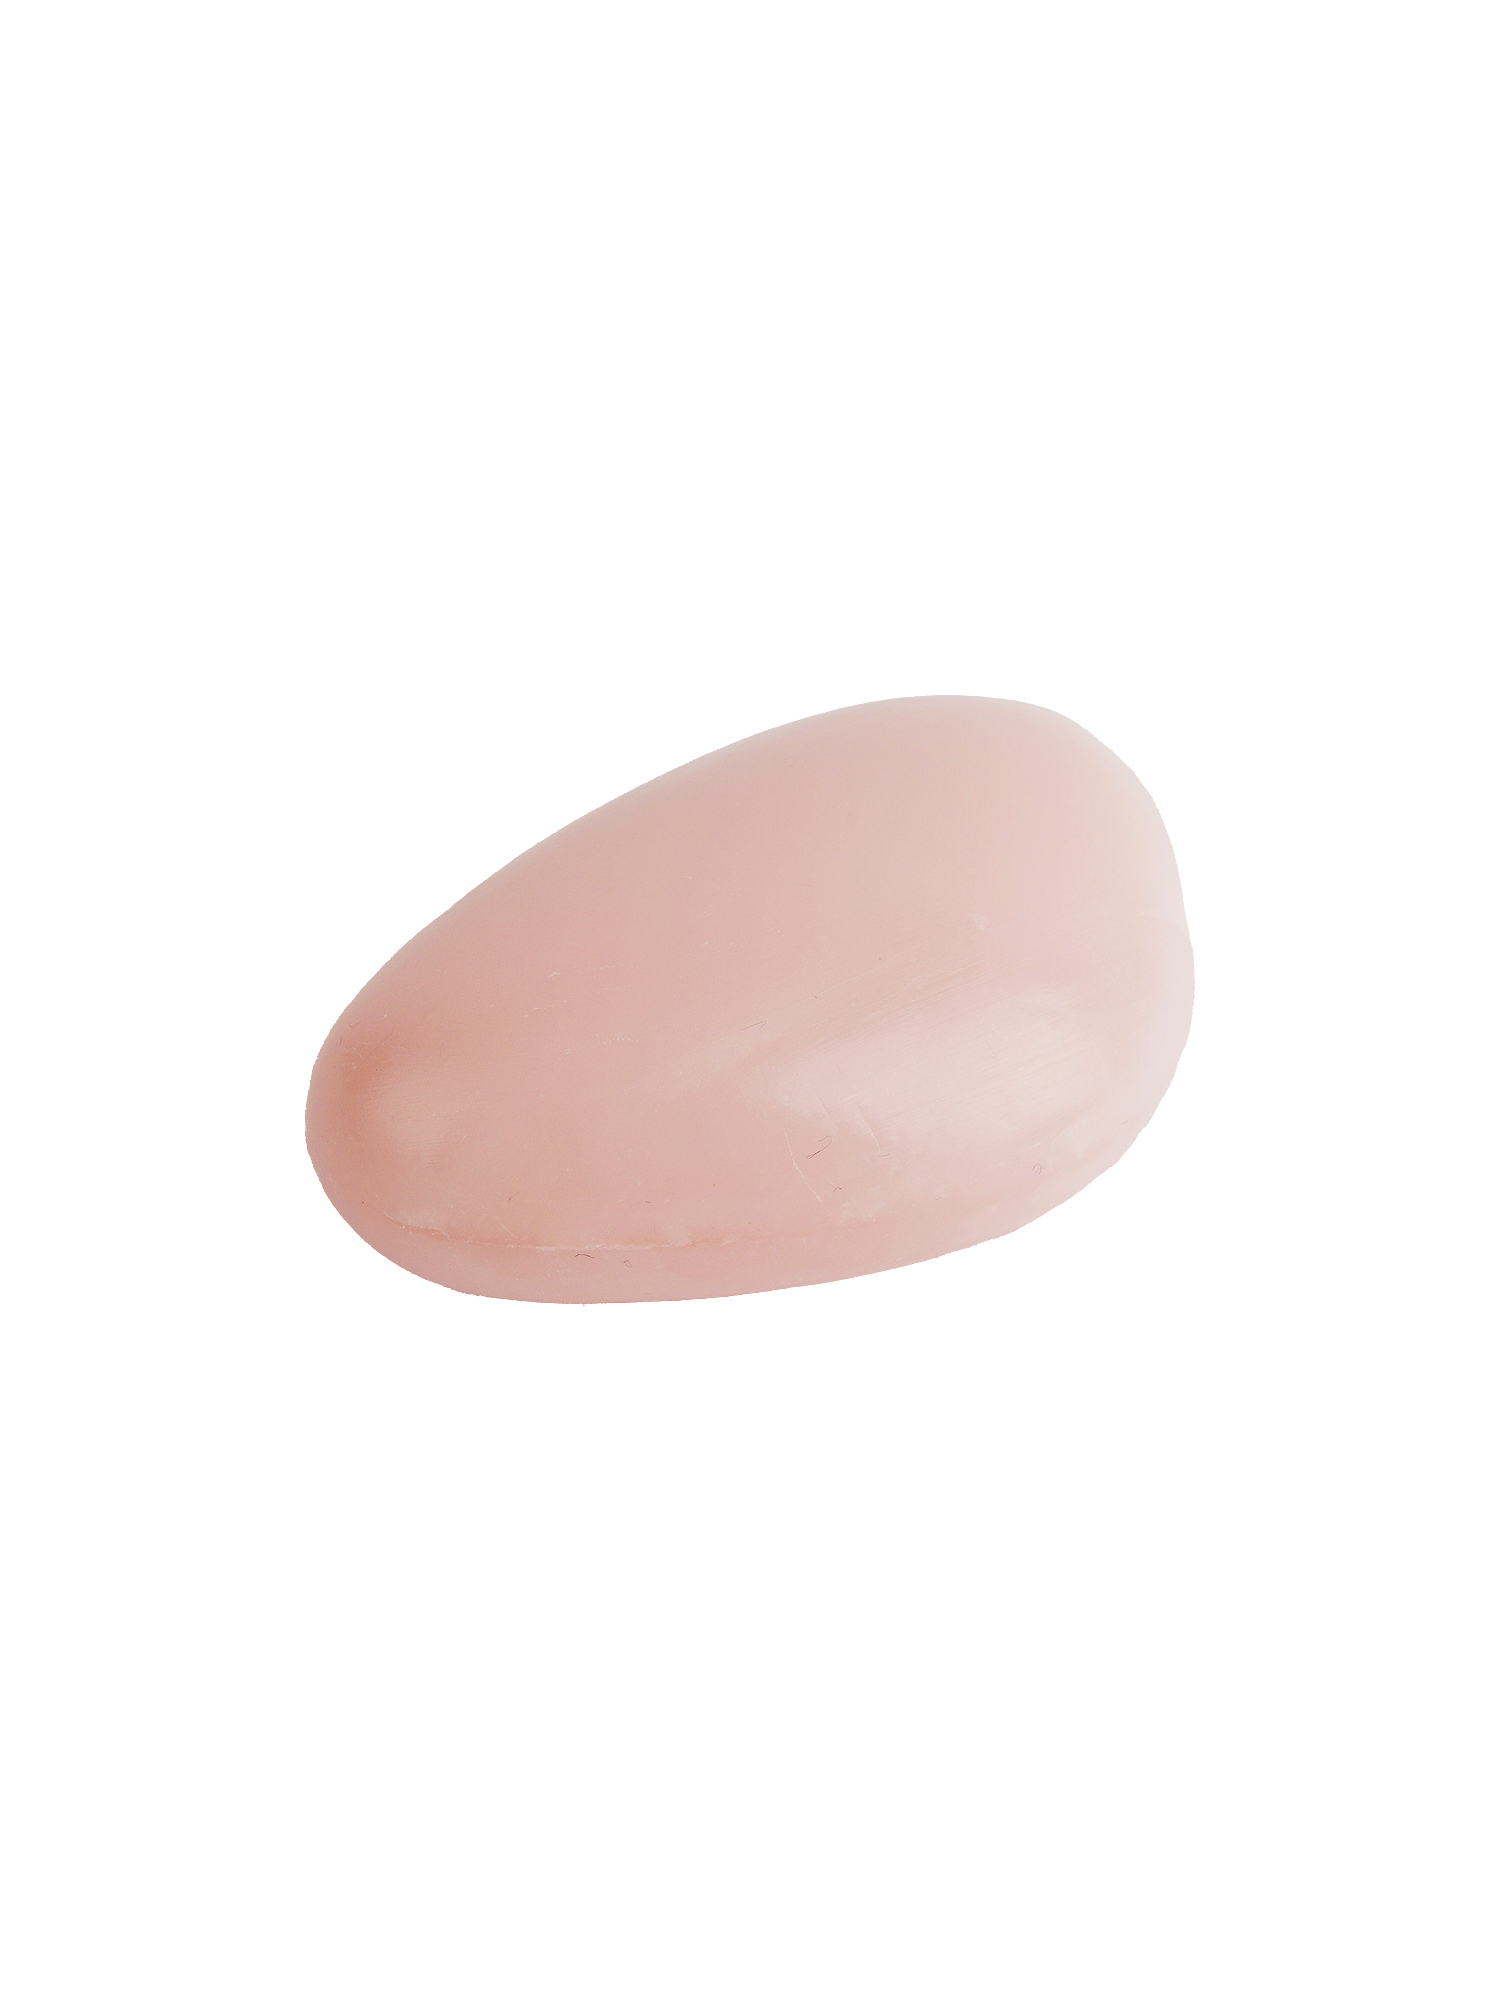 Seaglass Soap Coral Pink